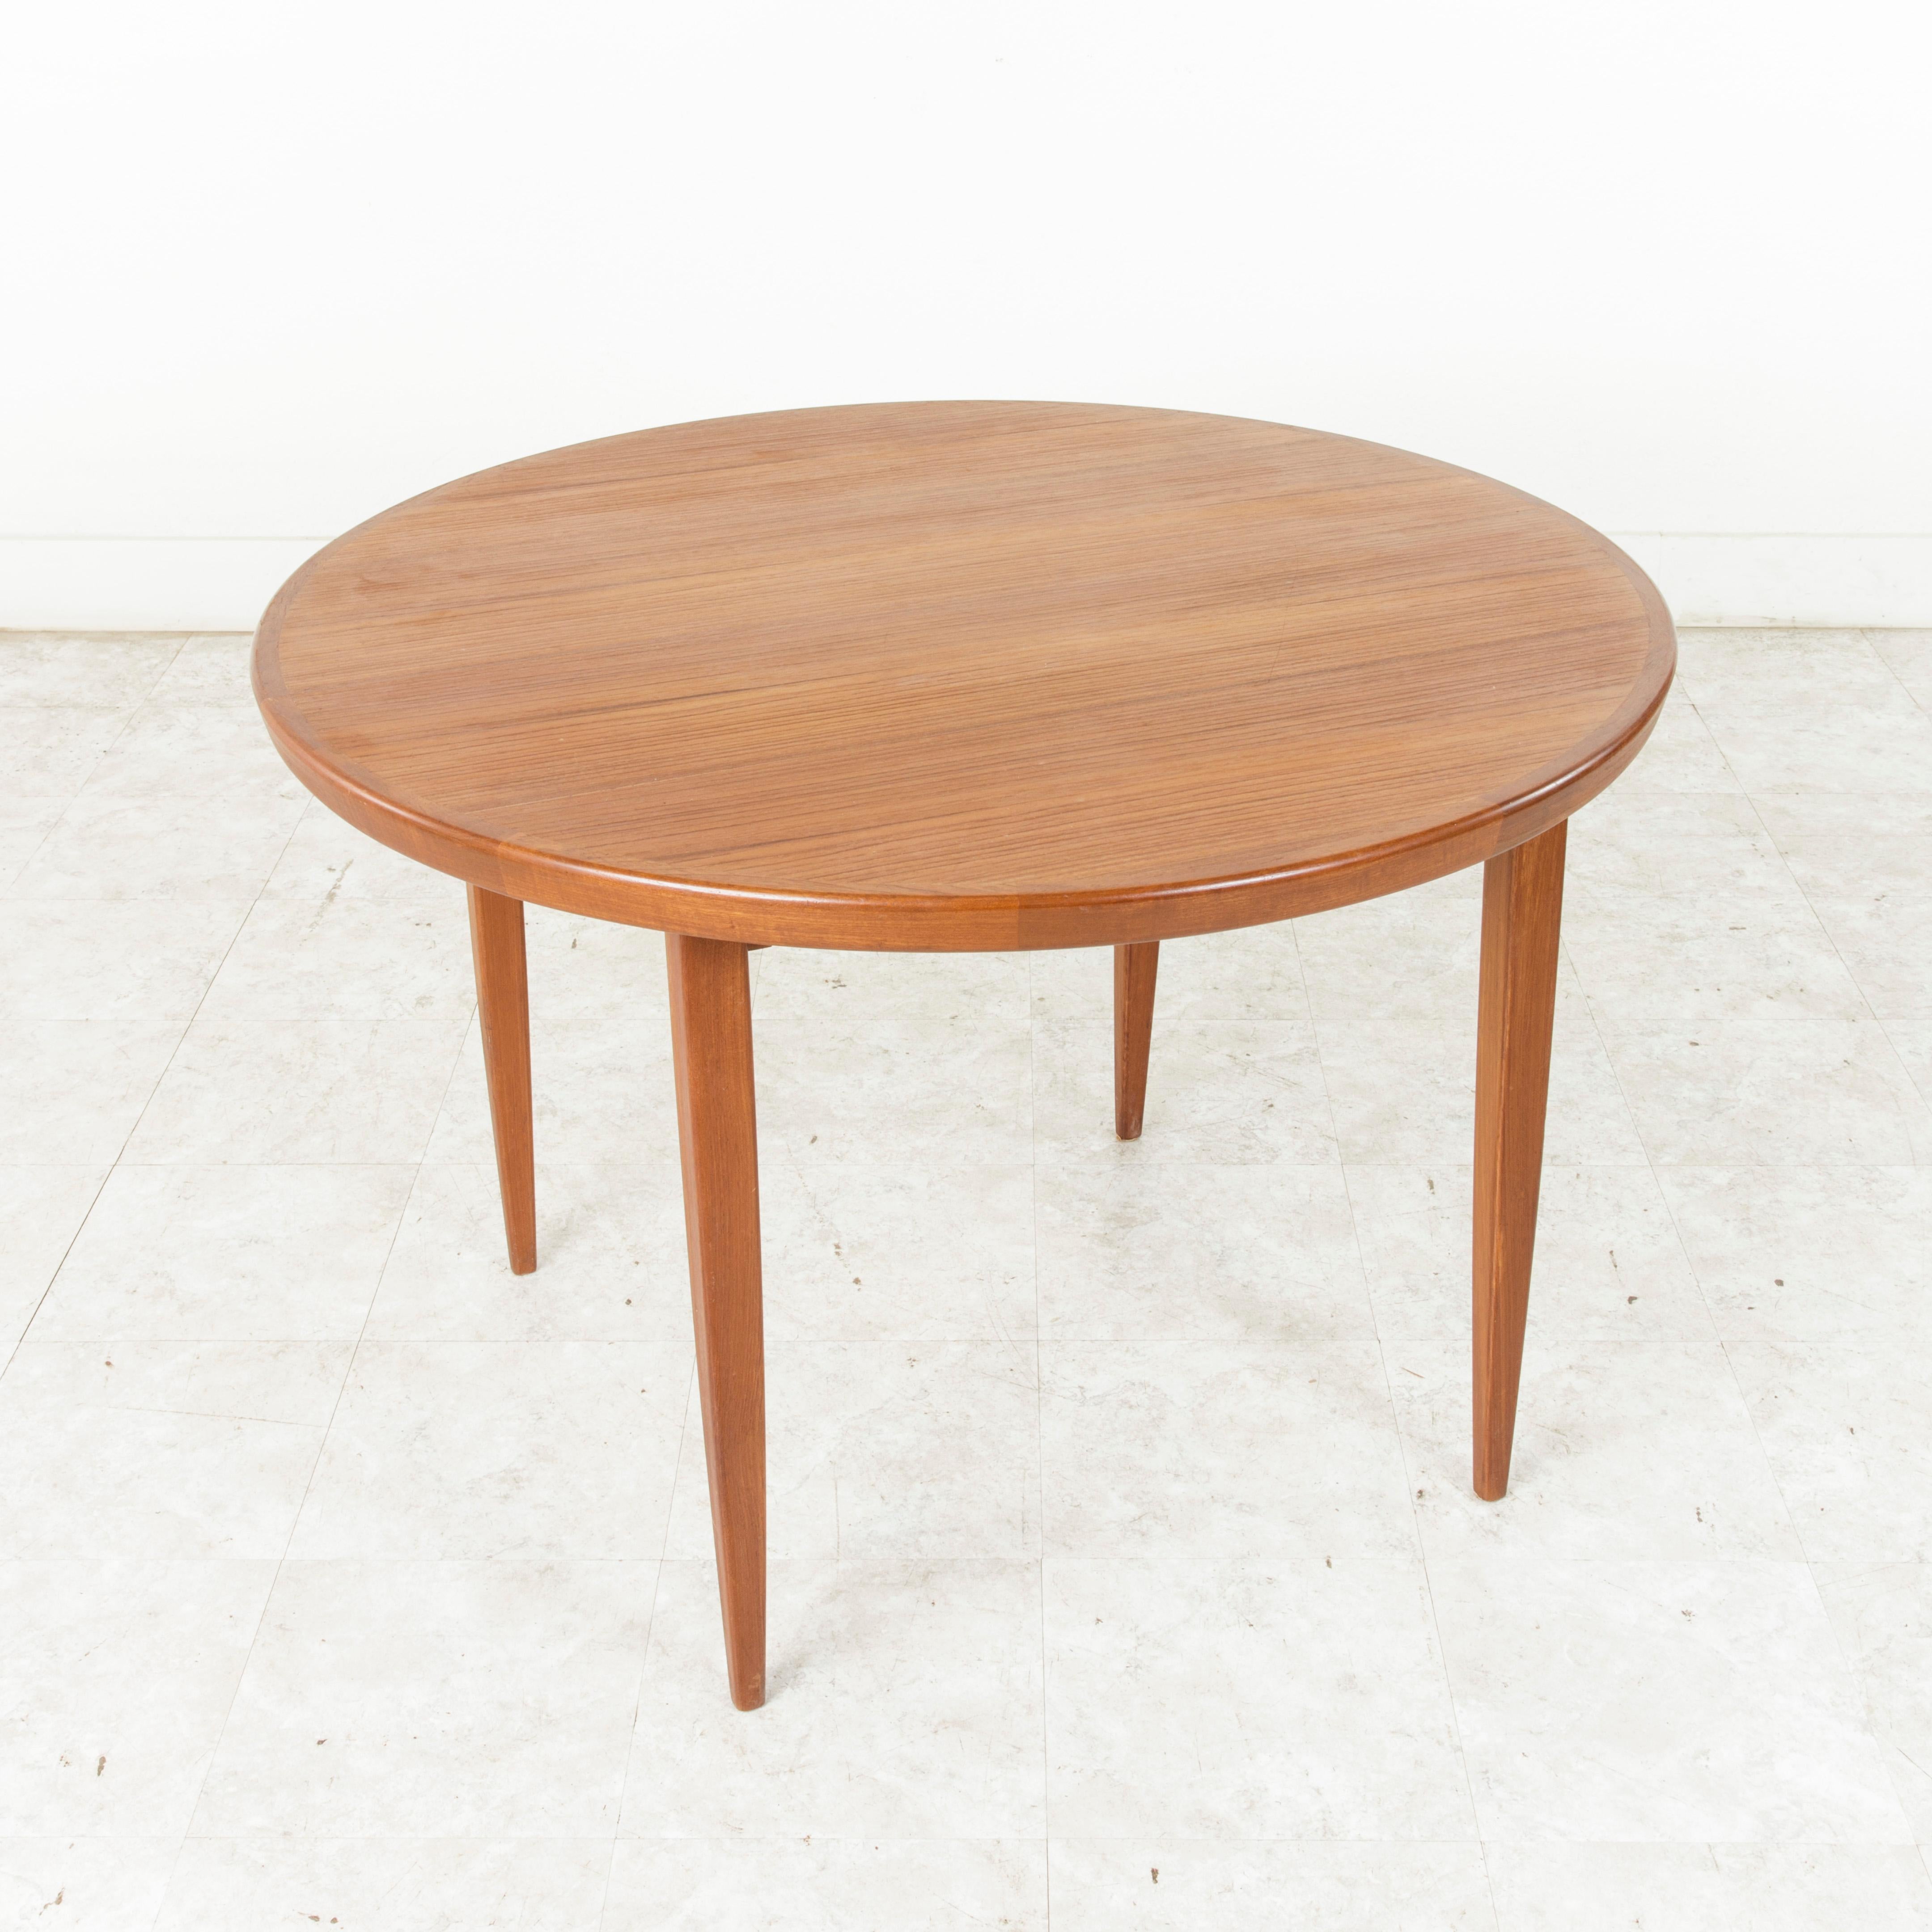 Mid-Century Modern Midcentury Danish Round Teak Table and Four Chairs by Niels Koefoed, Hornslet